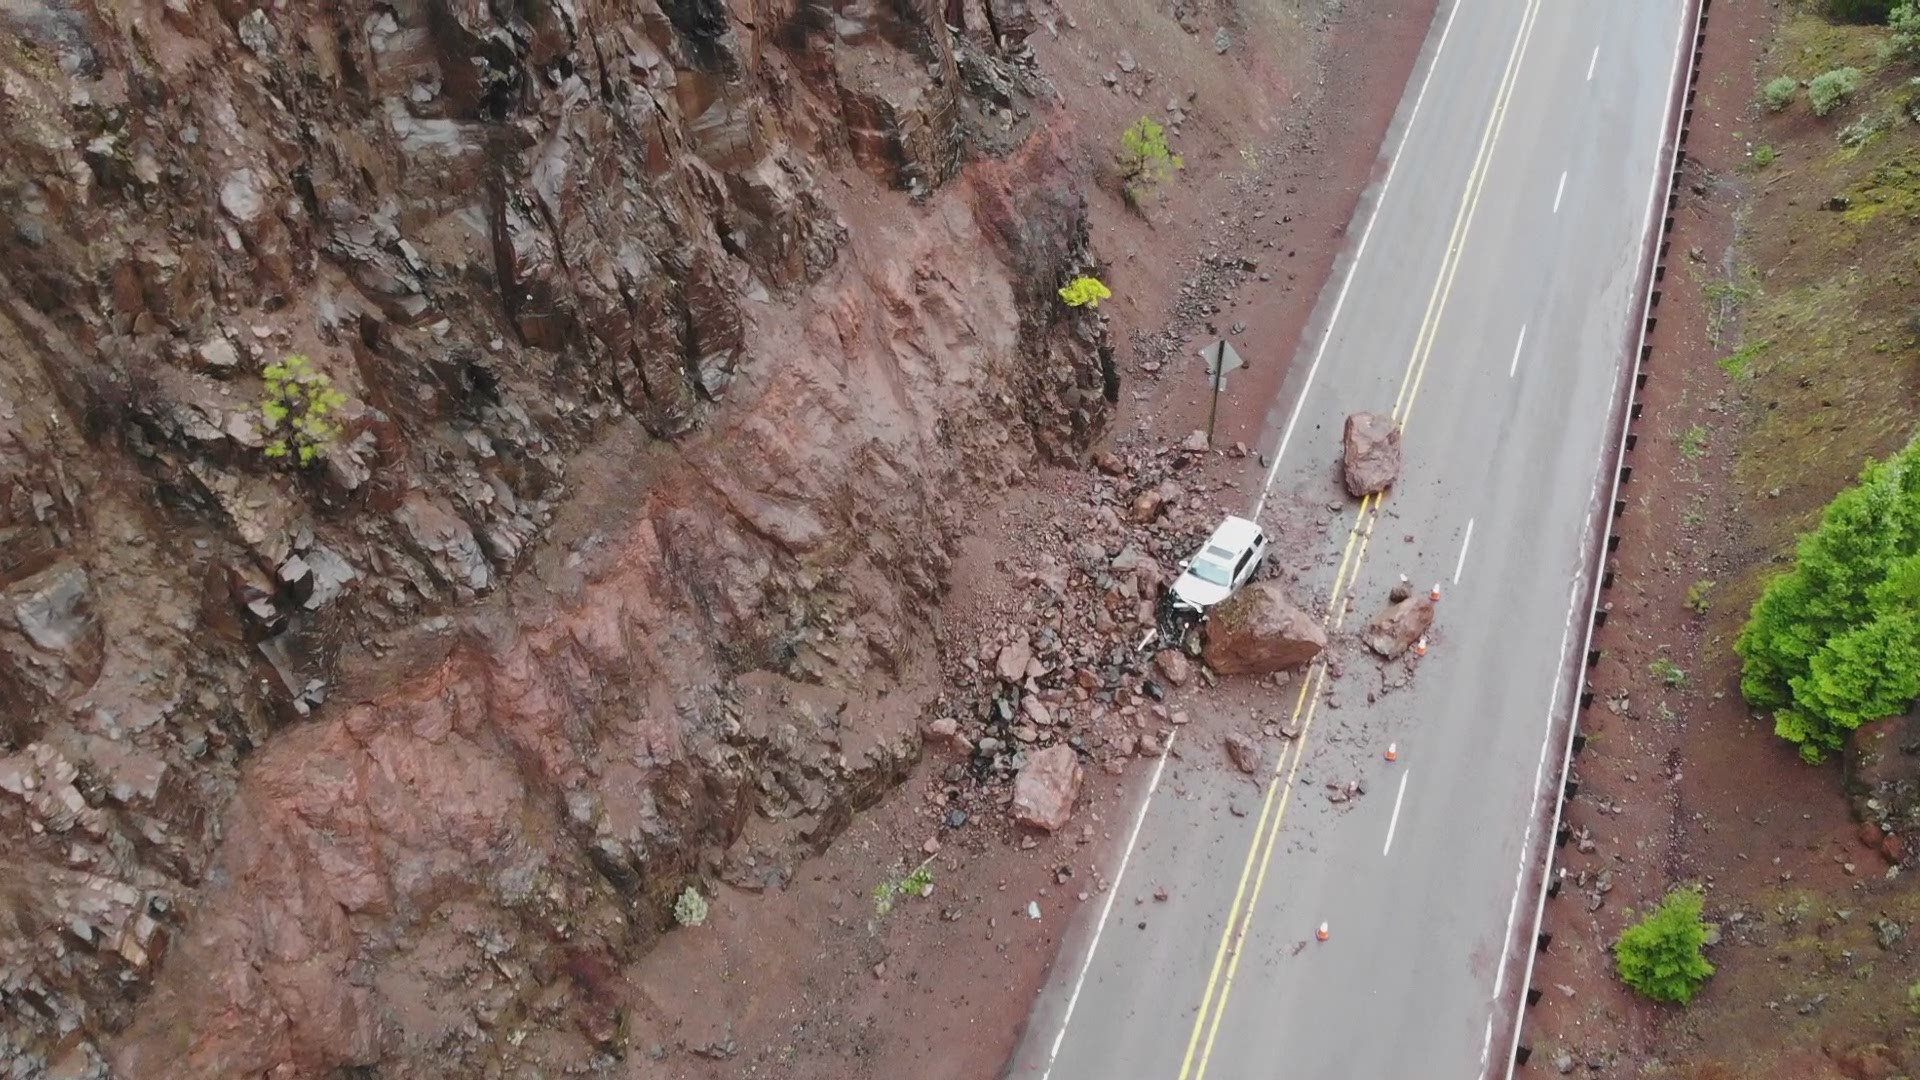 Drone video of a rockslide that happened on Highway 62, near the Southern Oregon town of prospect. The boulders fell on Jan. 28, 2020. One person was hurt.